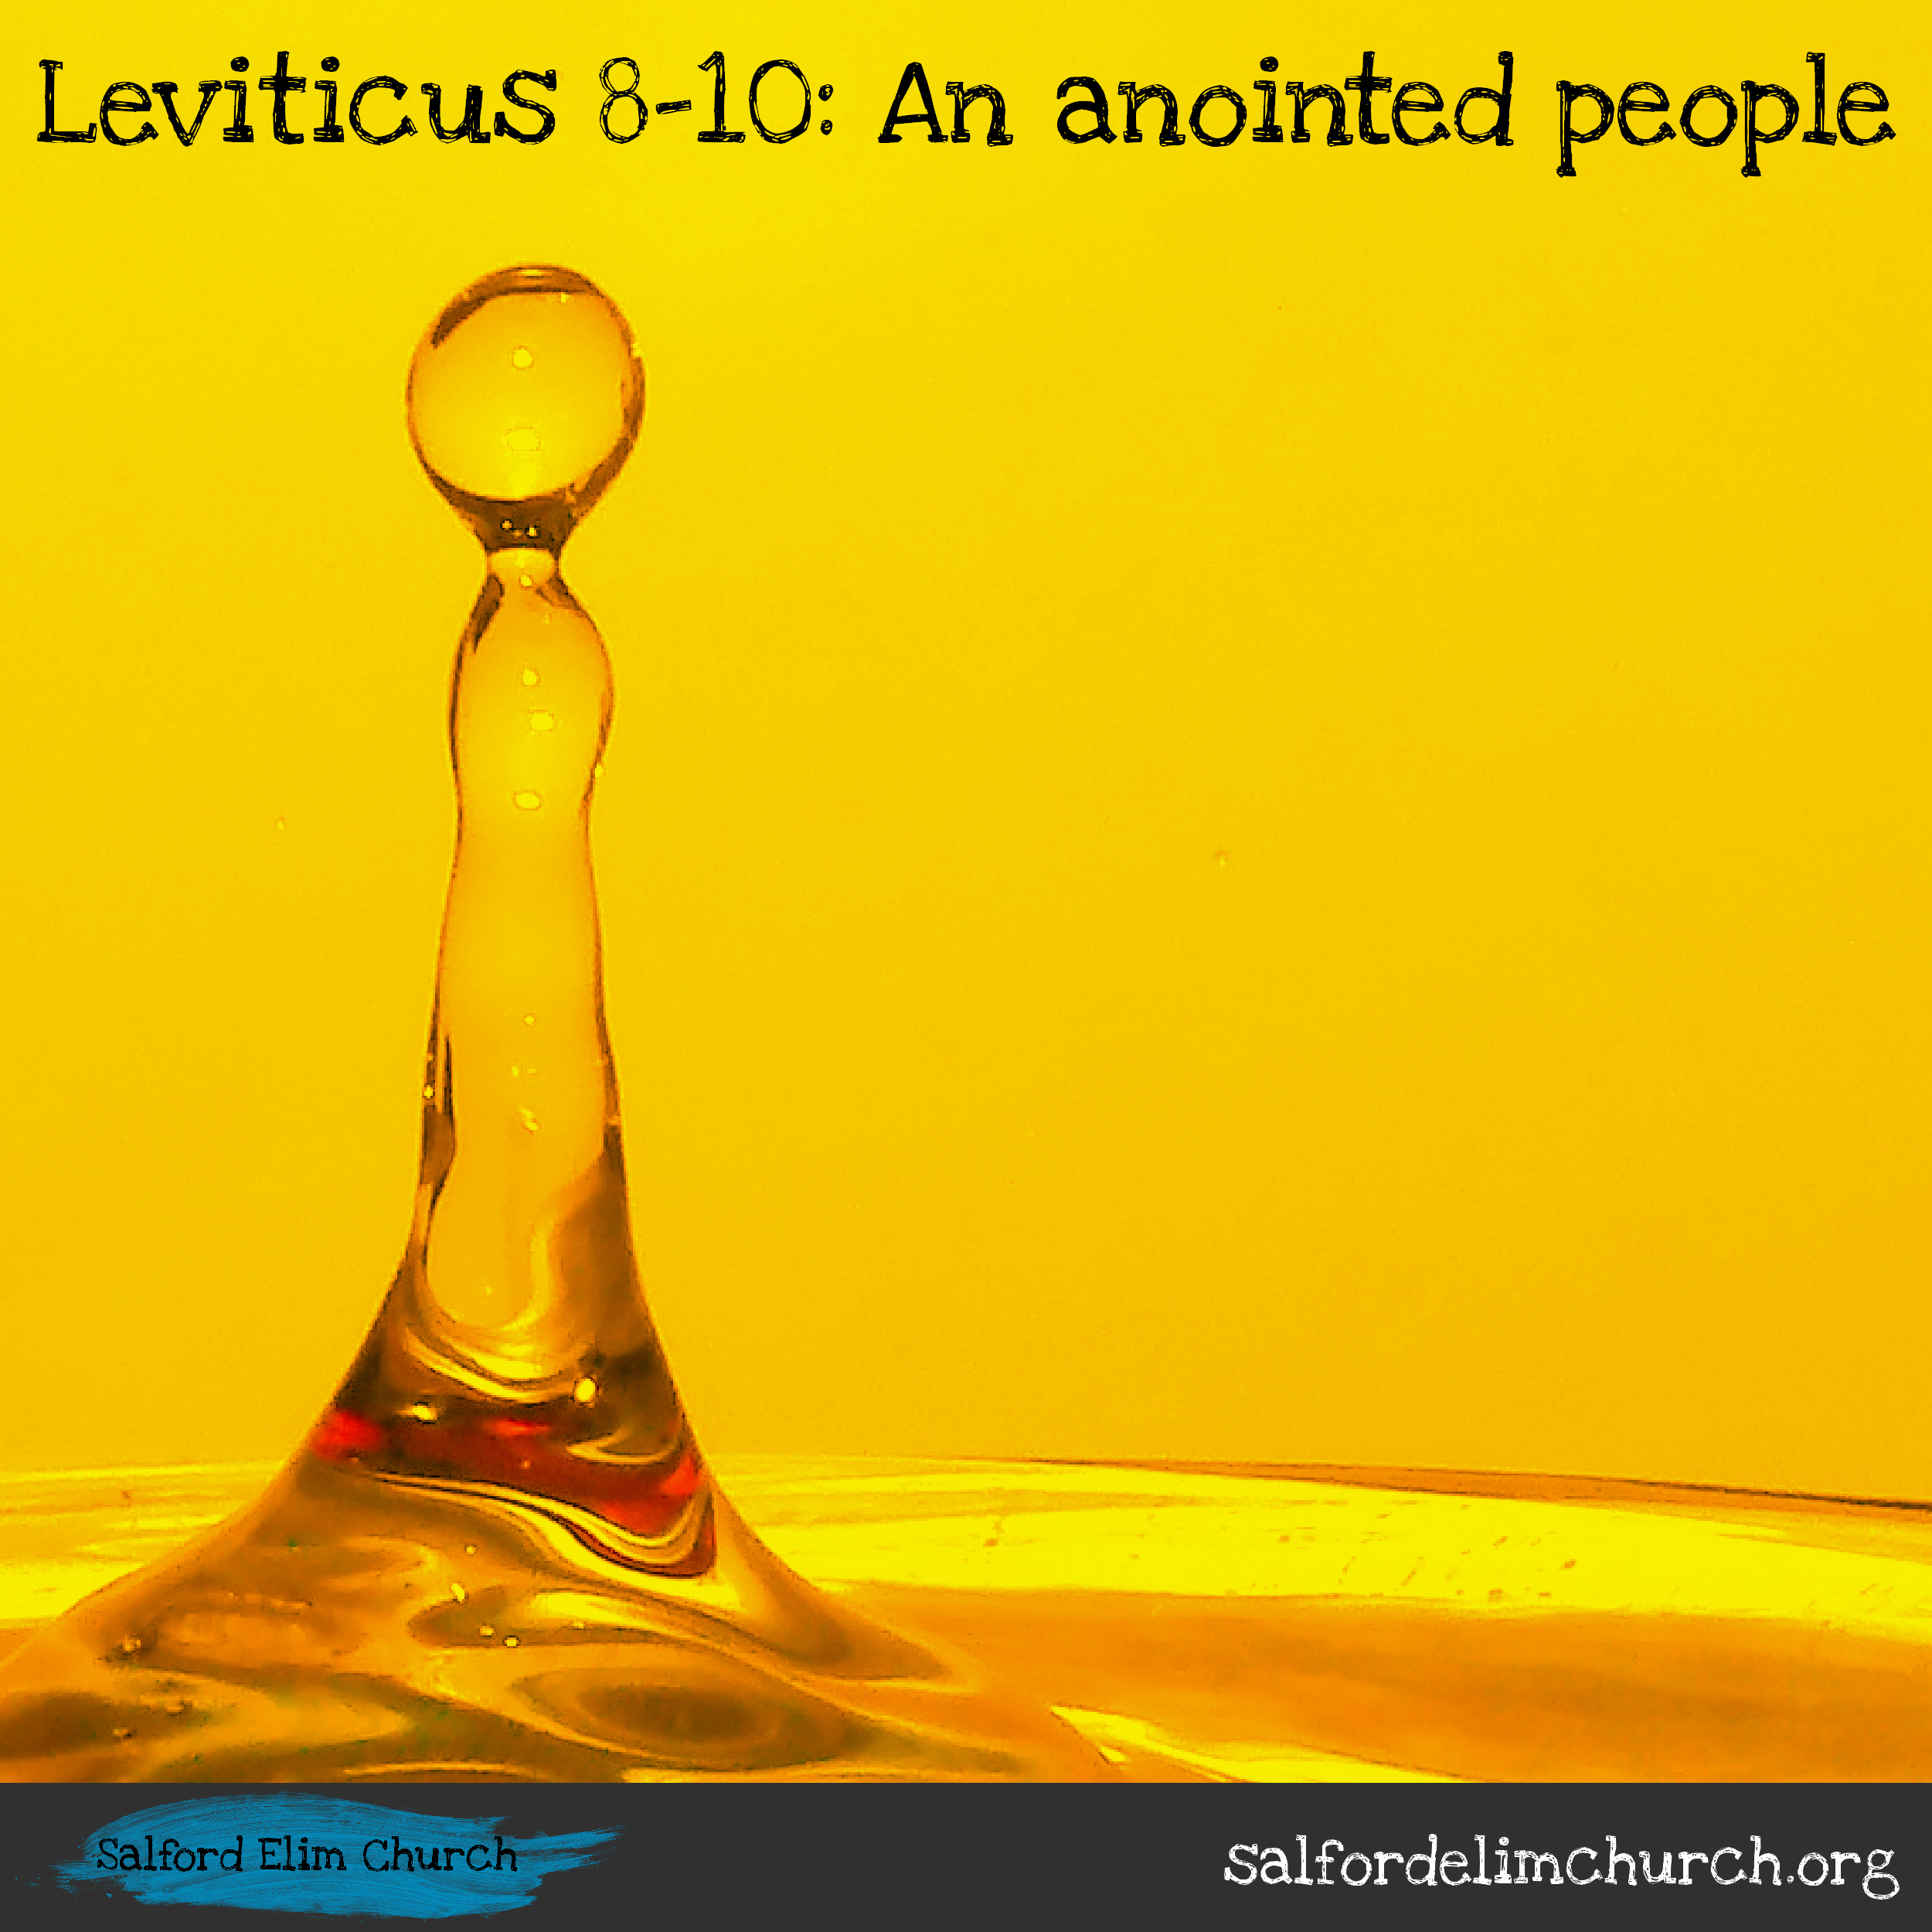 Leviticus 8-10 | An anointed people